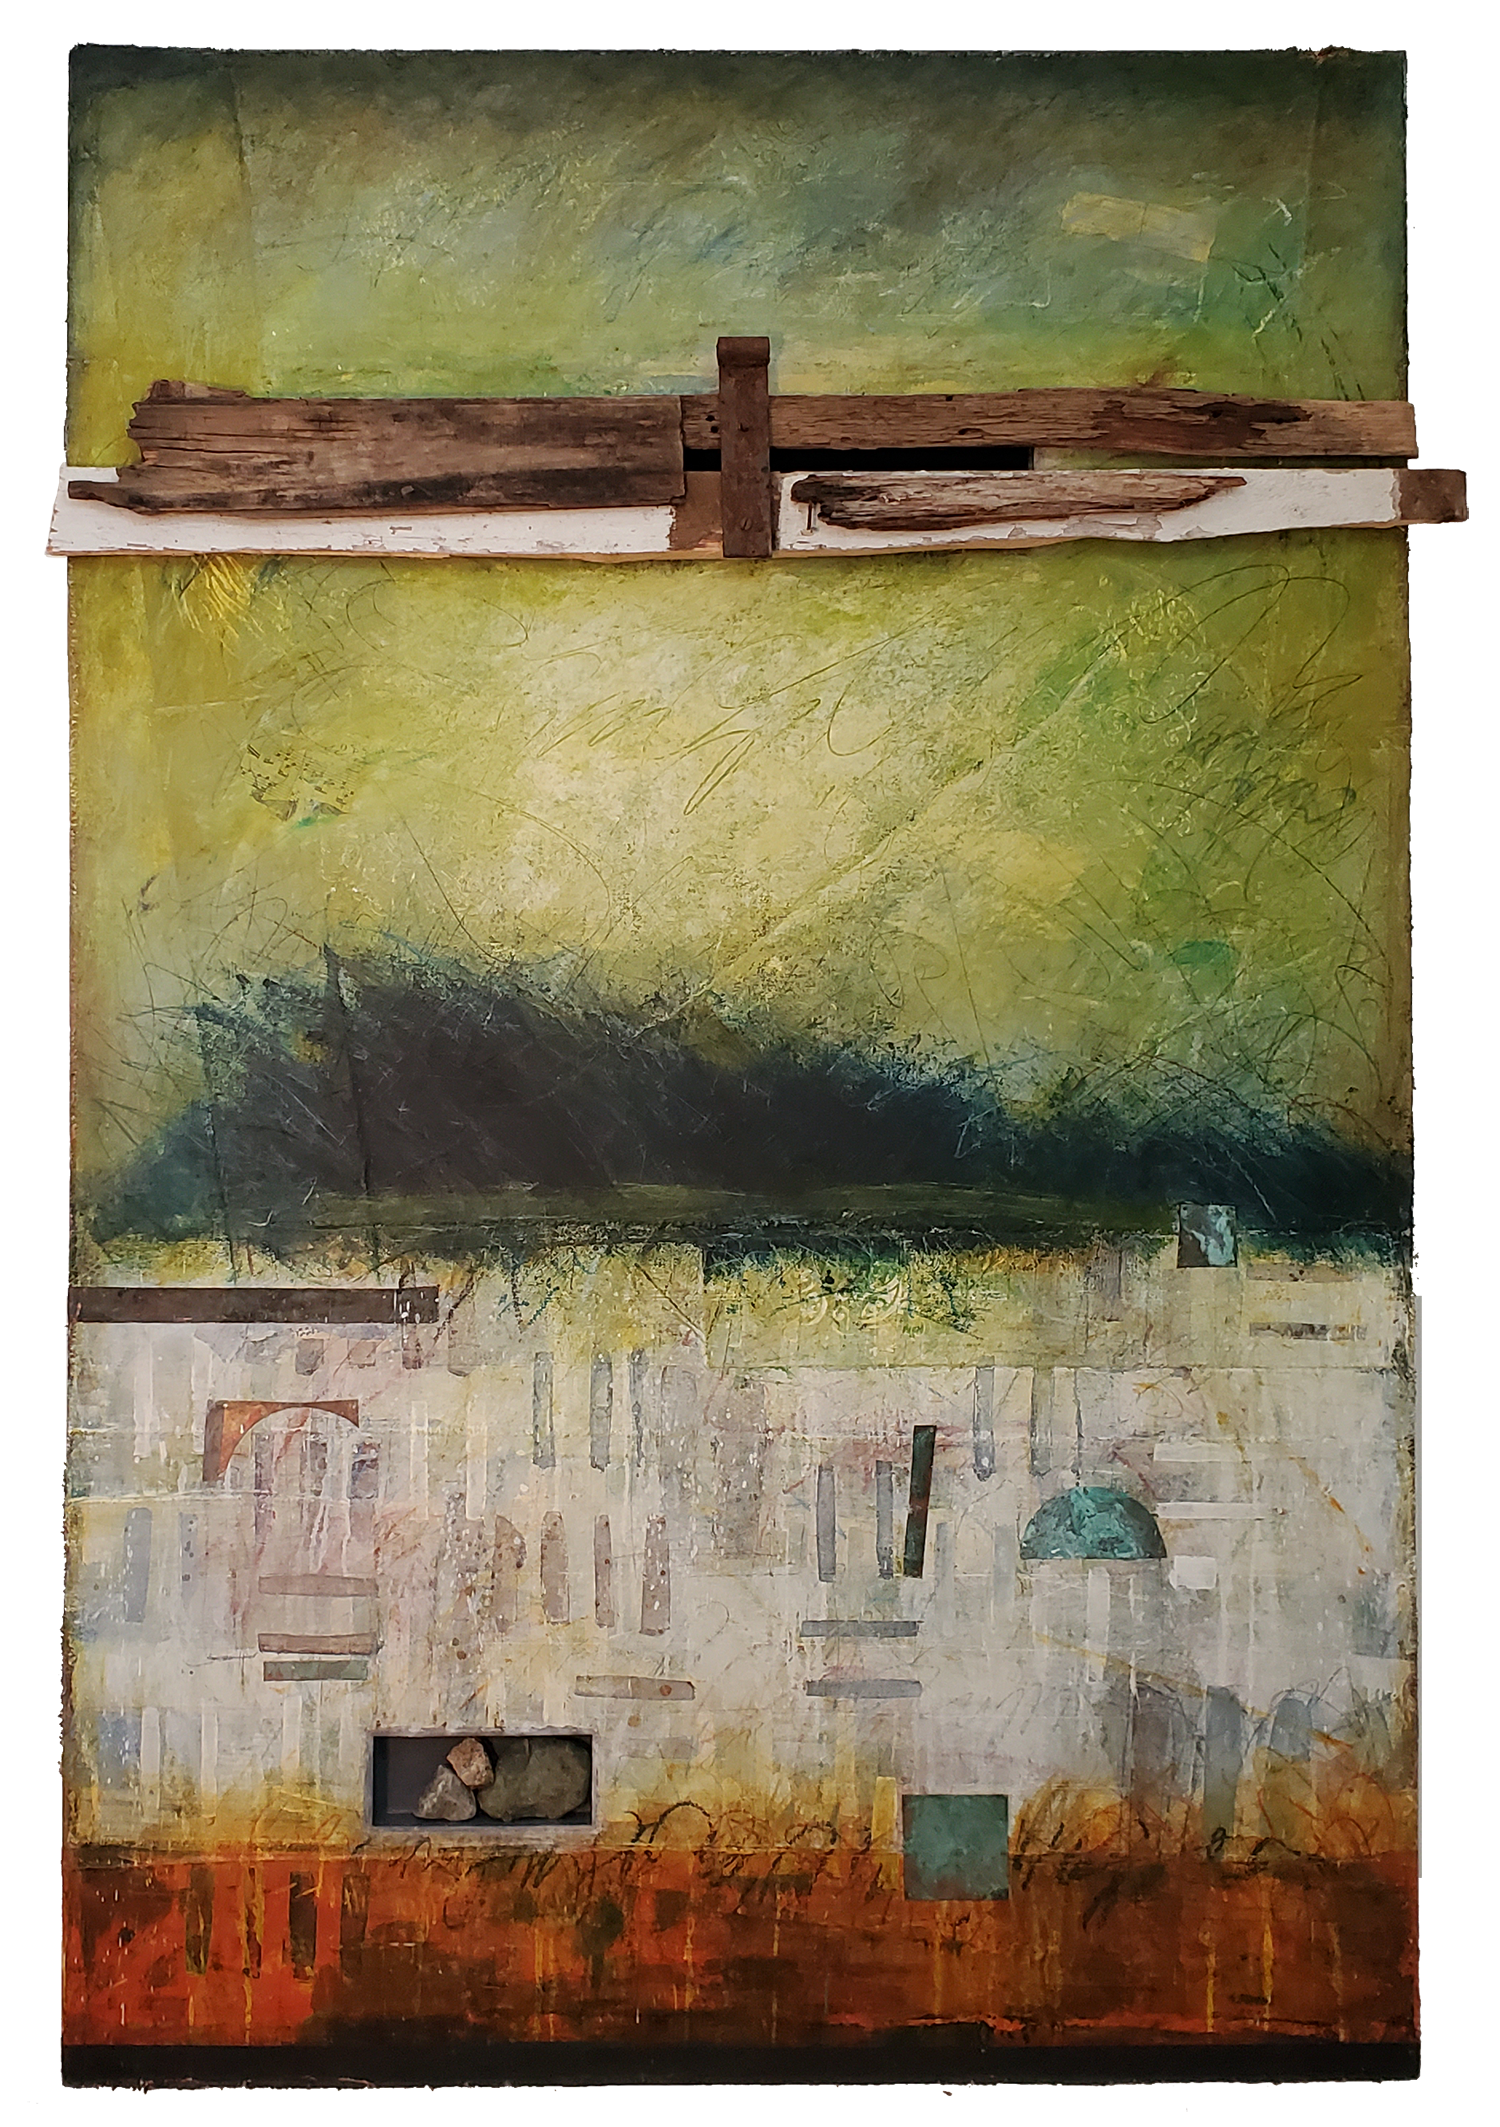 Vanishing Landscape Green with 3 stones, 60x42 inches, oil on panel with wood beam, by Jessie Pollock©2021